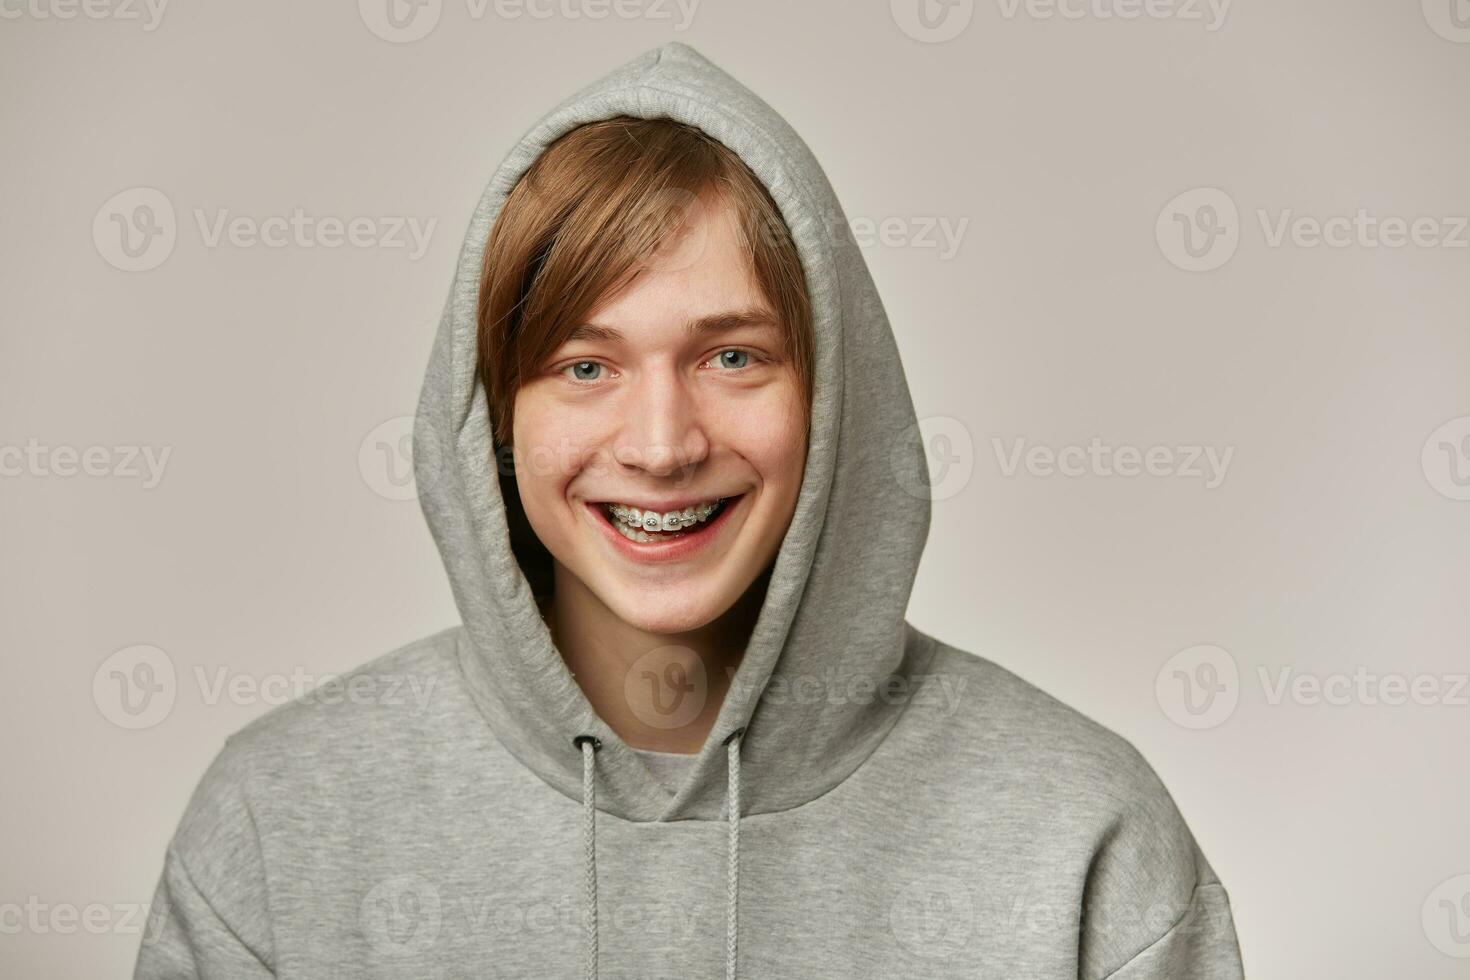 Cheerful teenage guy, happy looking man with blond hair. Wearing grey hoodie and has braces. Puts hood on and smiling. People and emotion concept. Watching at the camera isolated over grey background photo